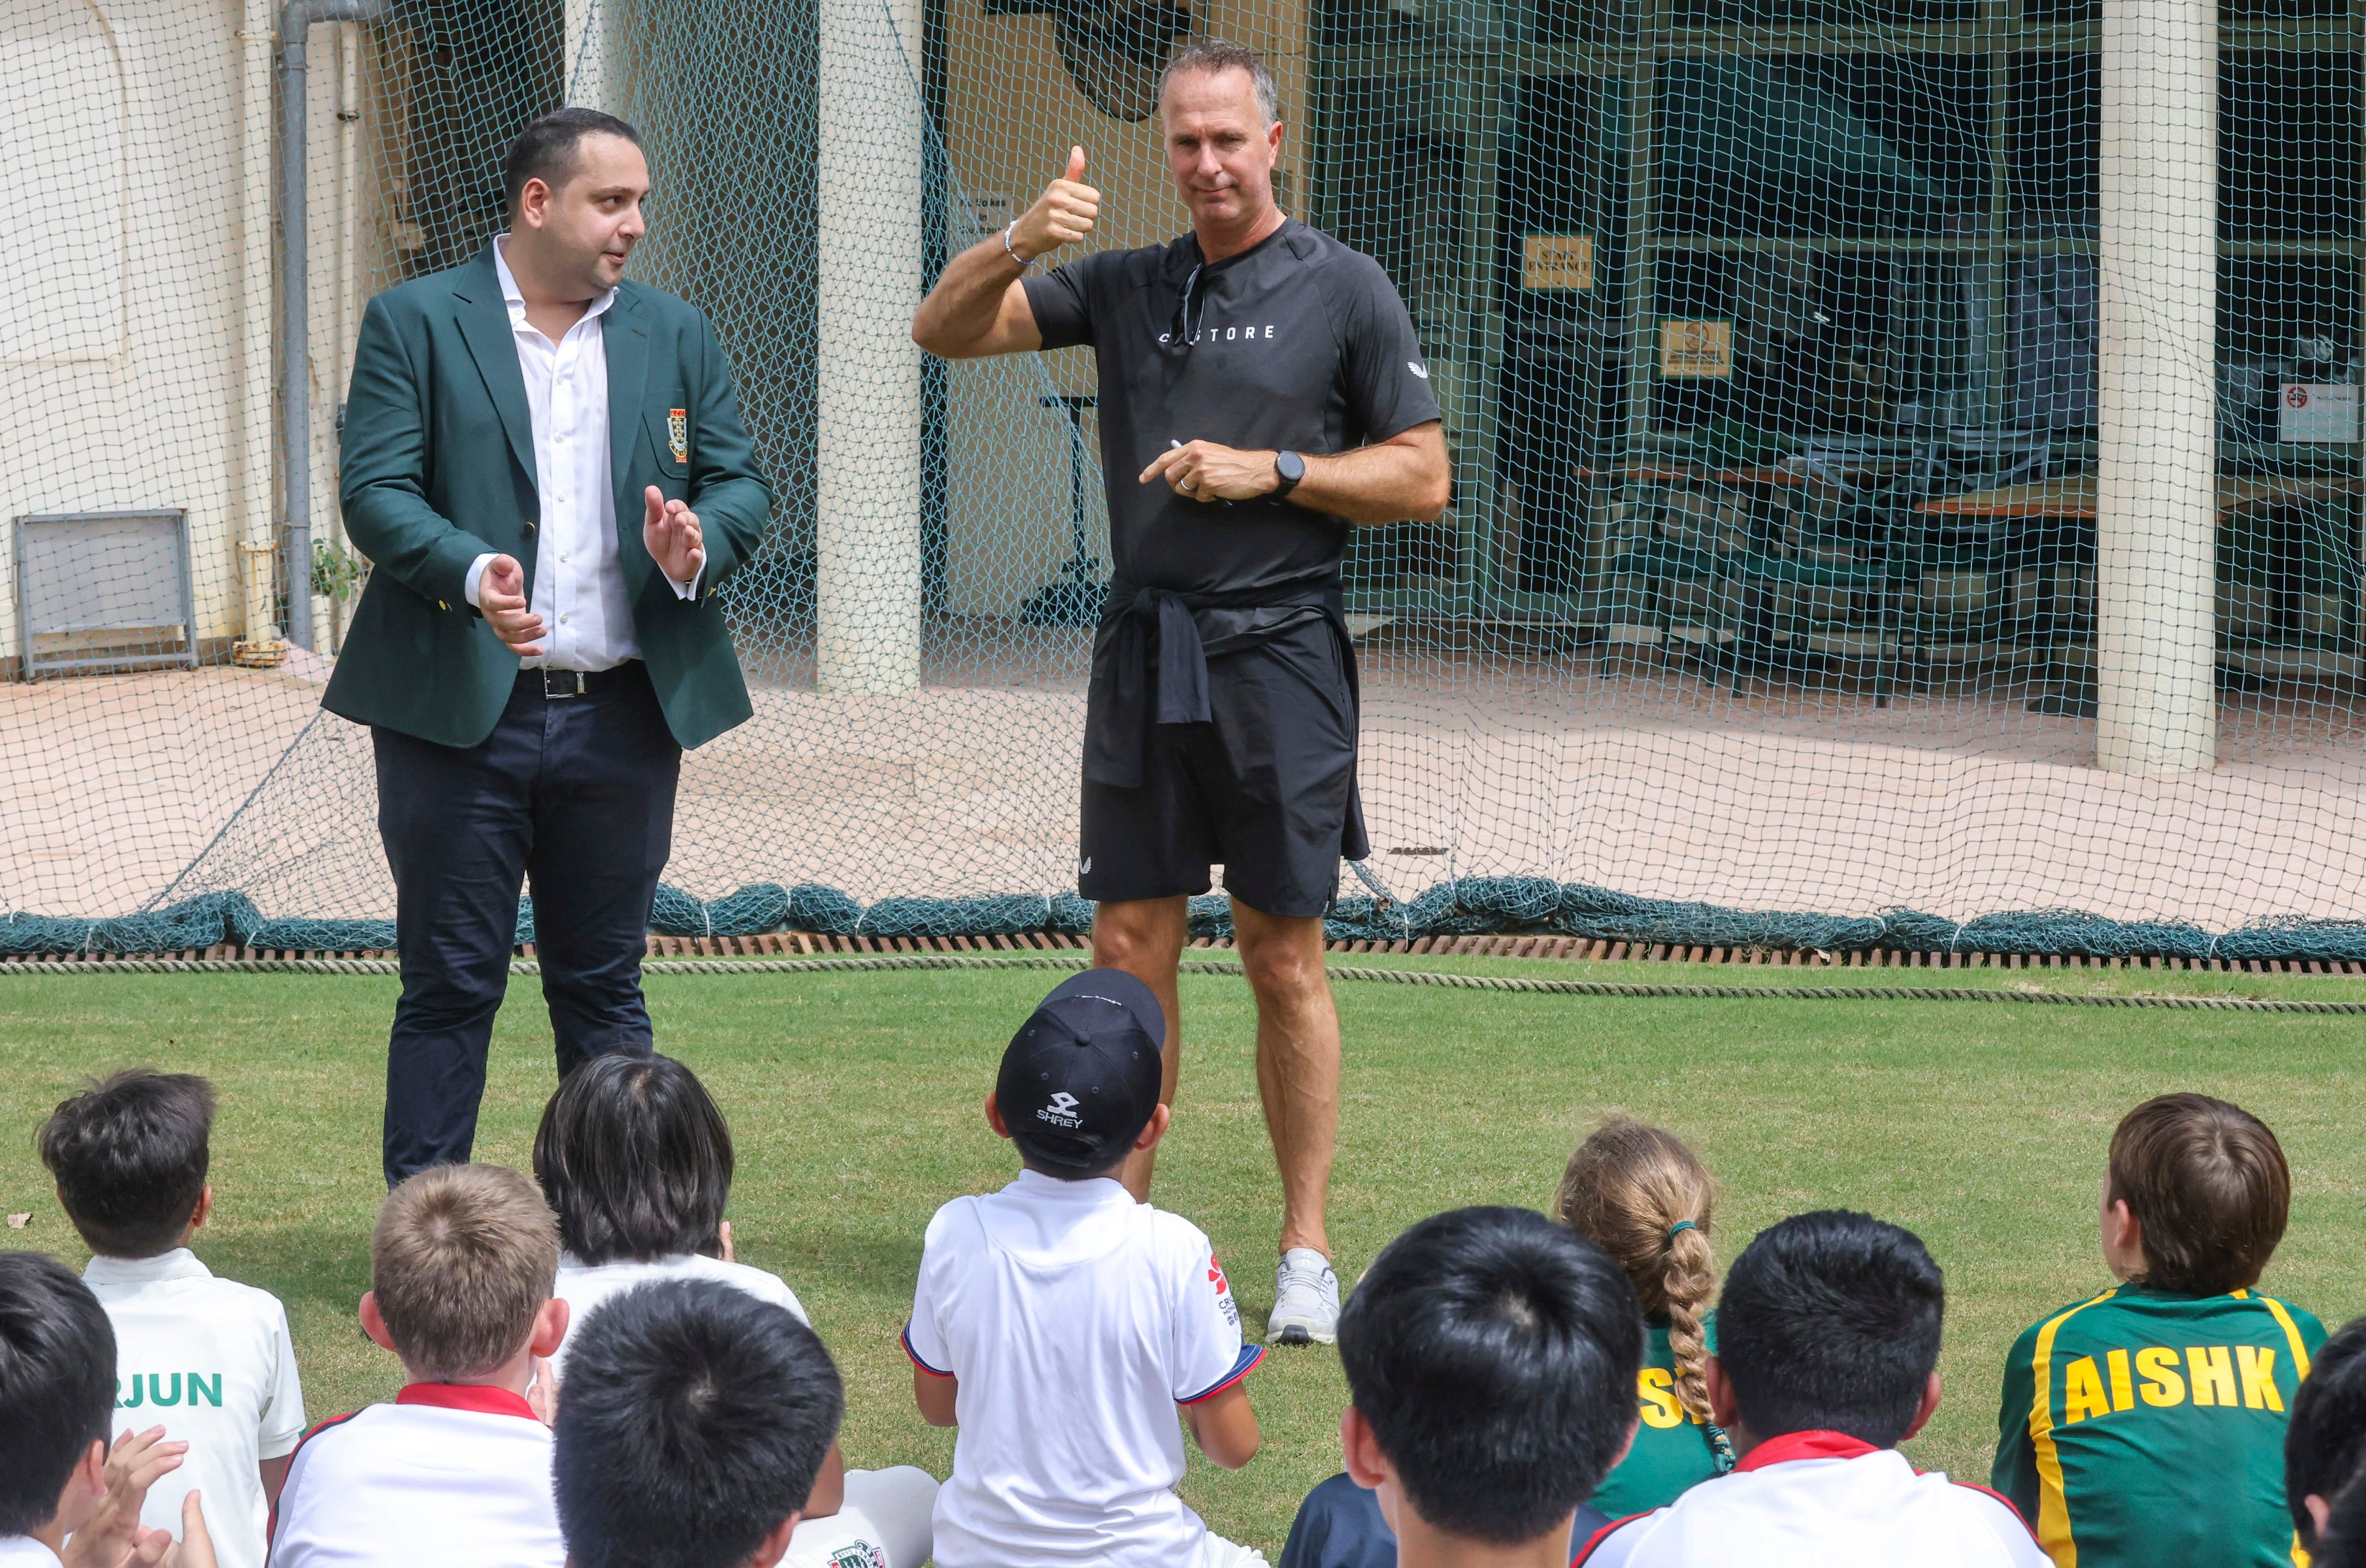 Former England cricket captain Michael Vaughan visits Kowloon Cricket Club for a children’s training session. Photo: Jonathan Wong